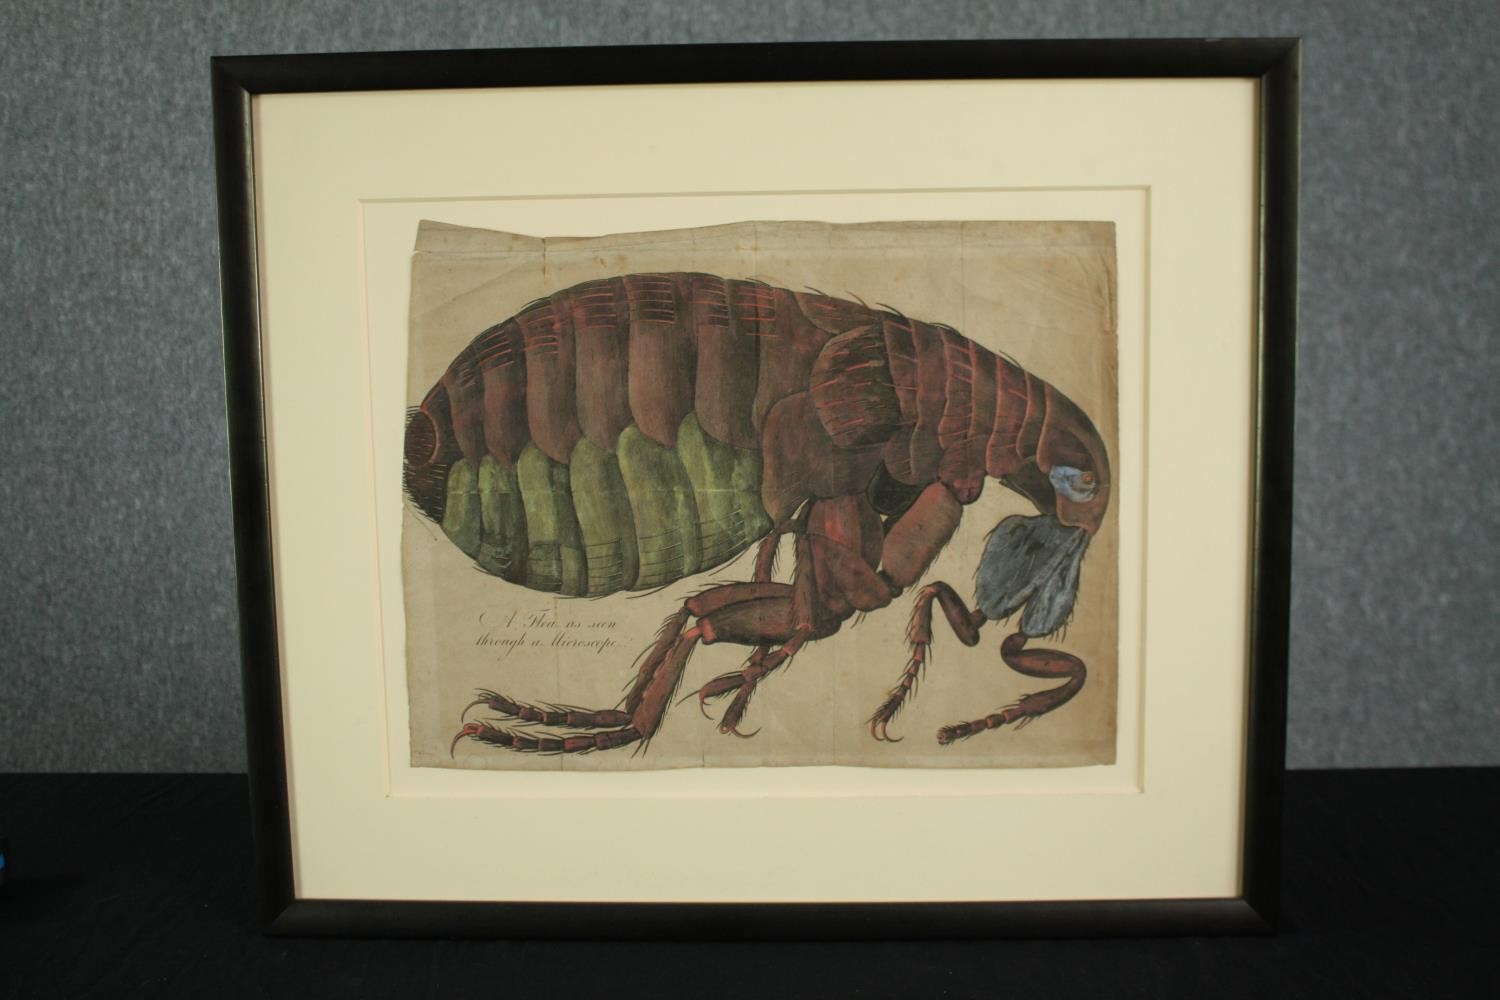 A highly detailed scientific study of a flea. Watercolour on paper backed onto an archival mount. - Image 2 of 3